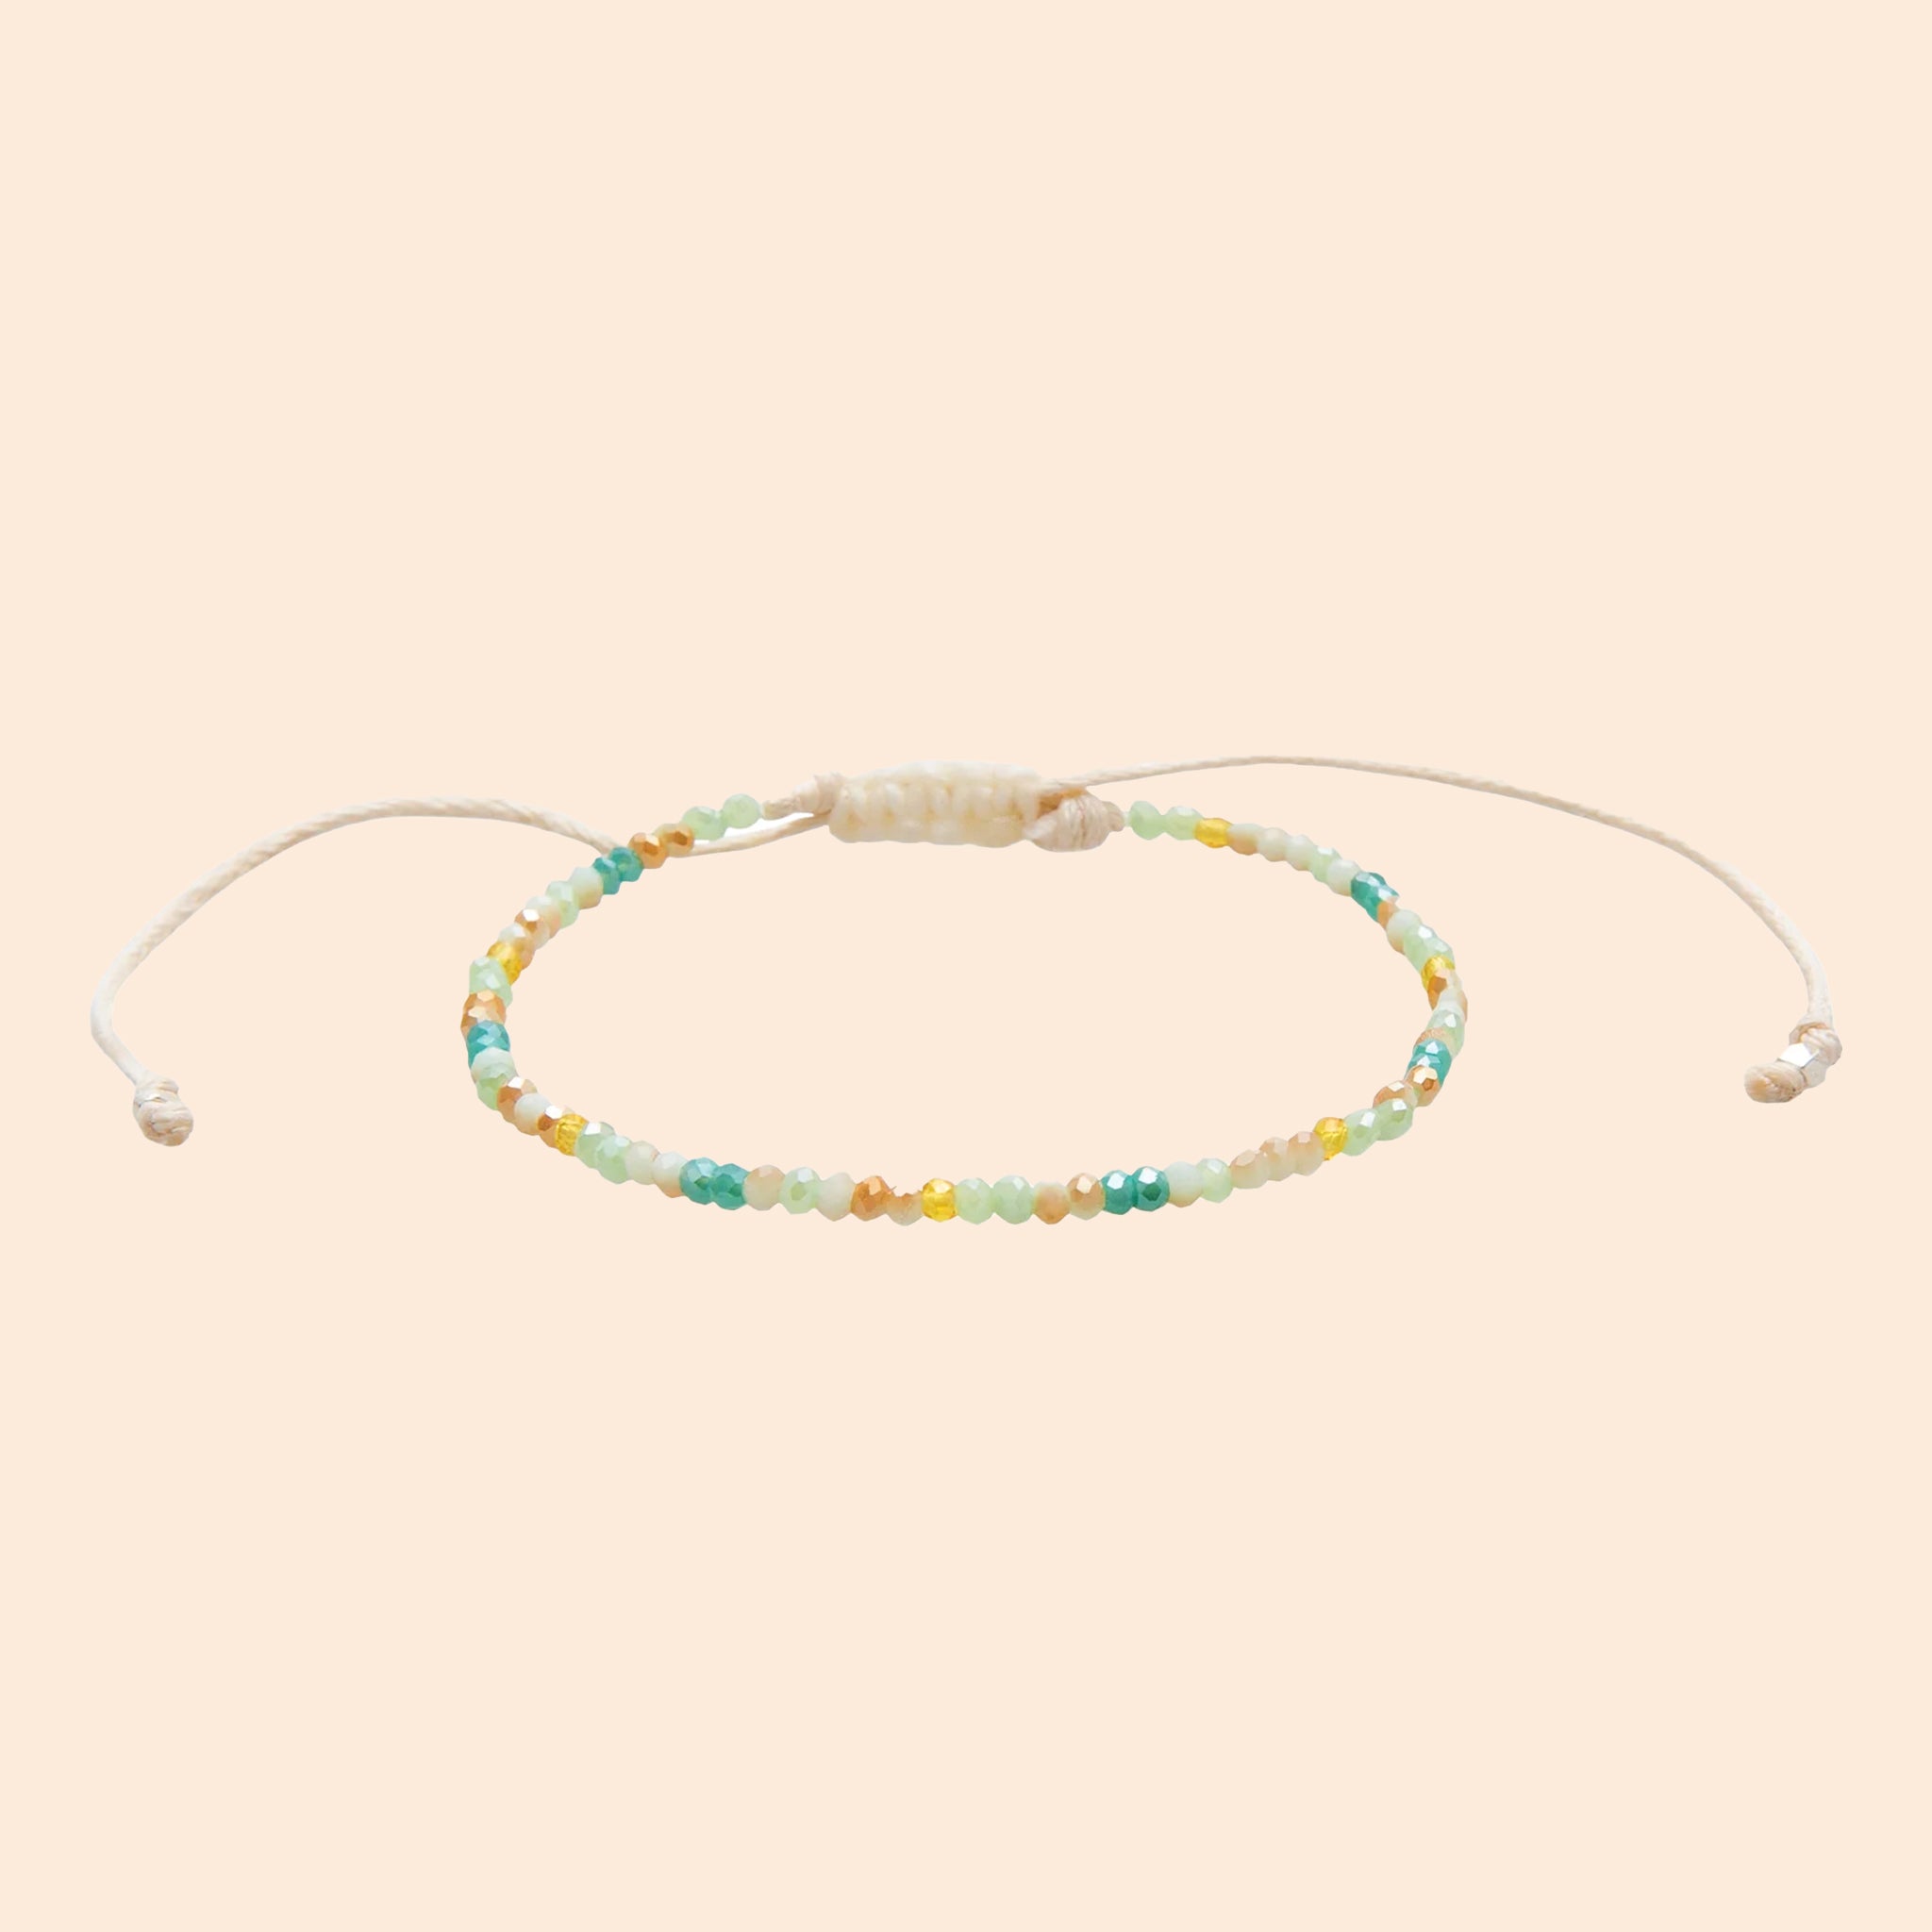 Teal, neutral and yellow beads strung to make a bracelet with an adjustable cord.